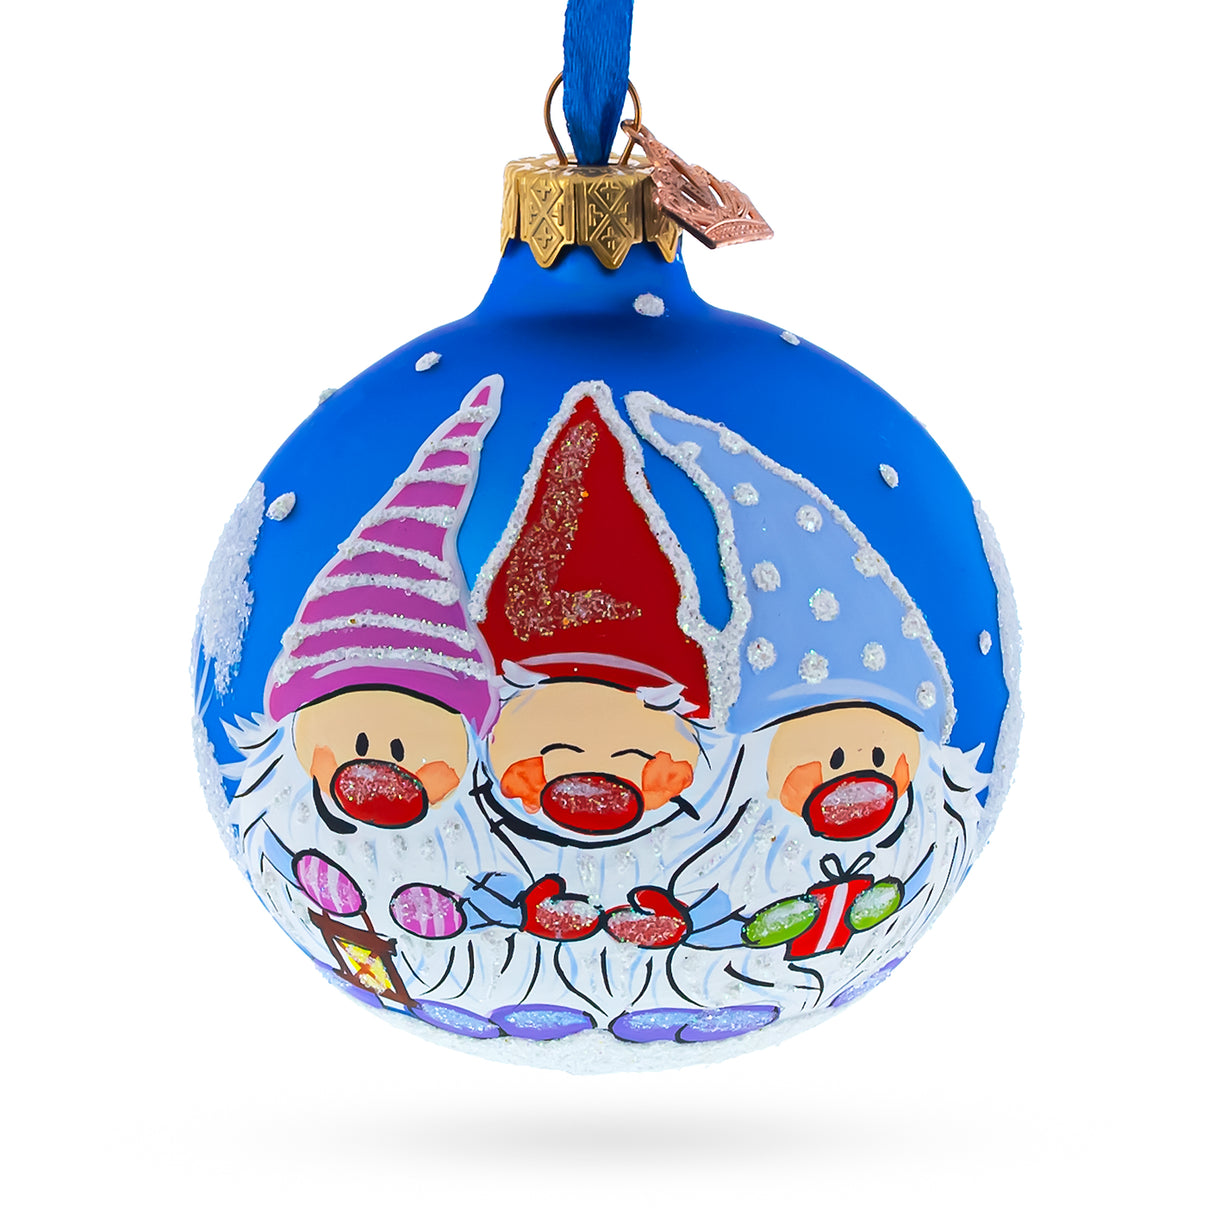 Joyful Trio of Gnomes Blown Glass Ball Christmas Ornament 3.25 Inches in Blue color, Round shape